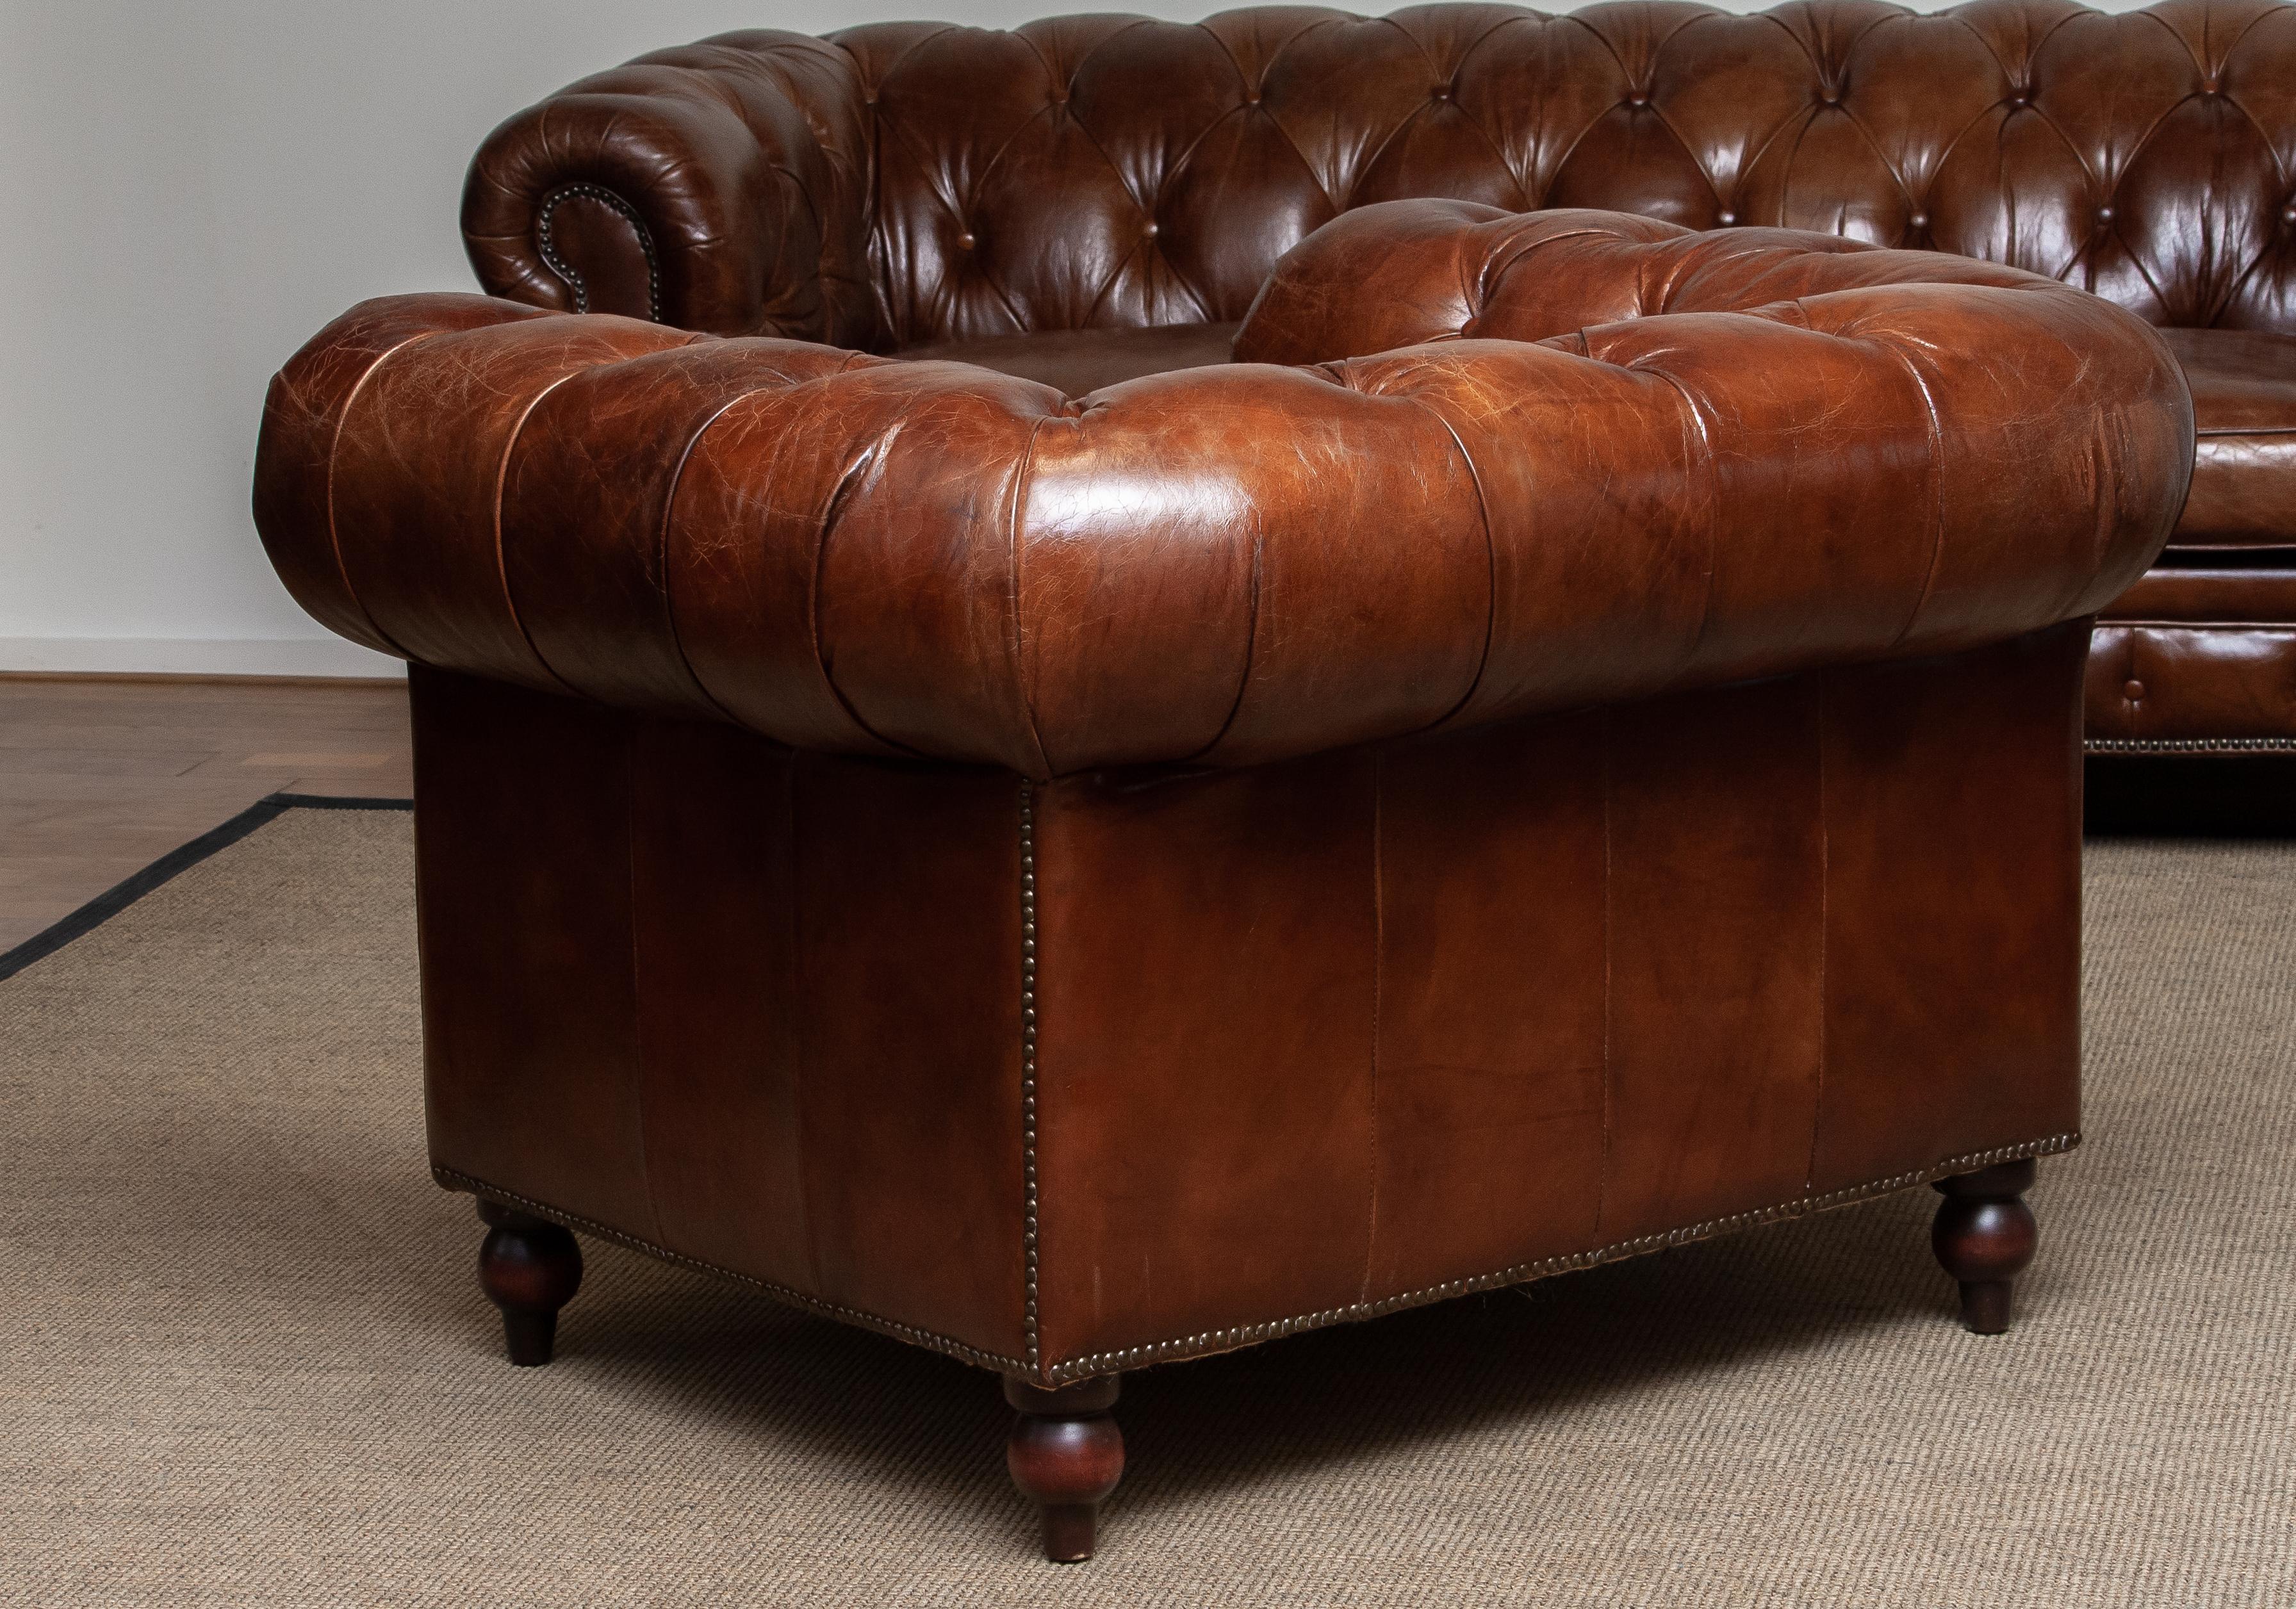 Tufted Brown Leather Chesterfield Sofa and Arm / Lounge Chair 1